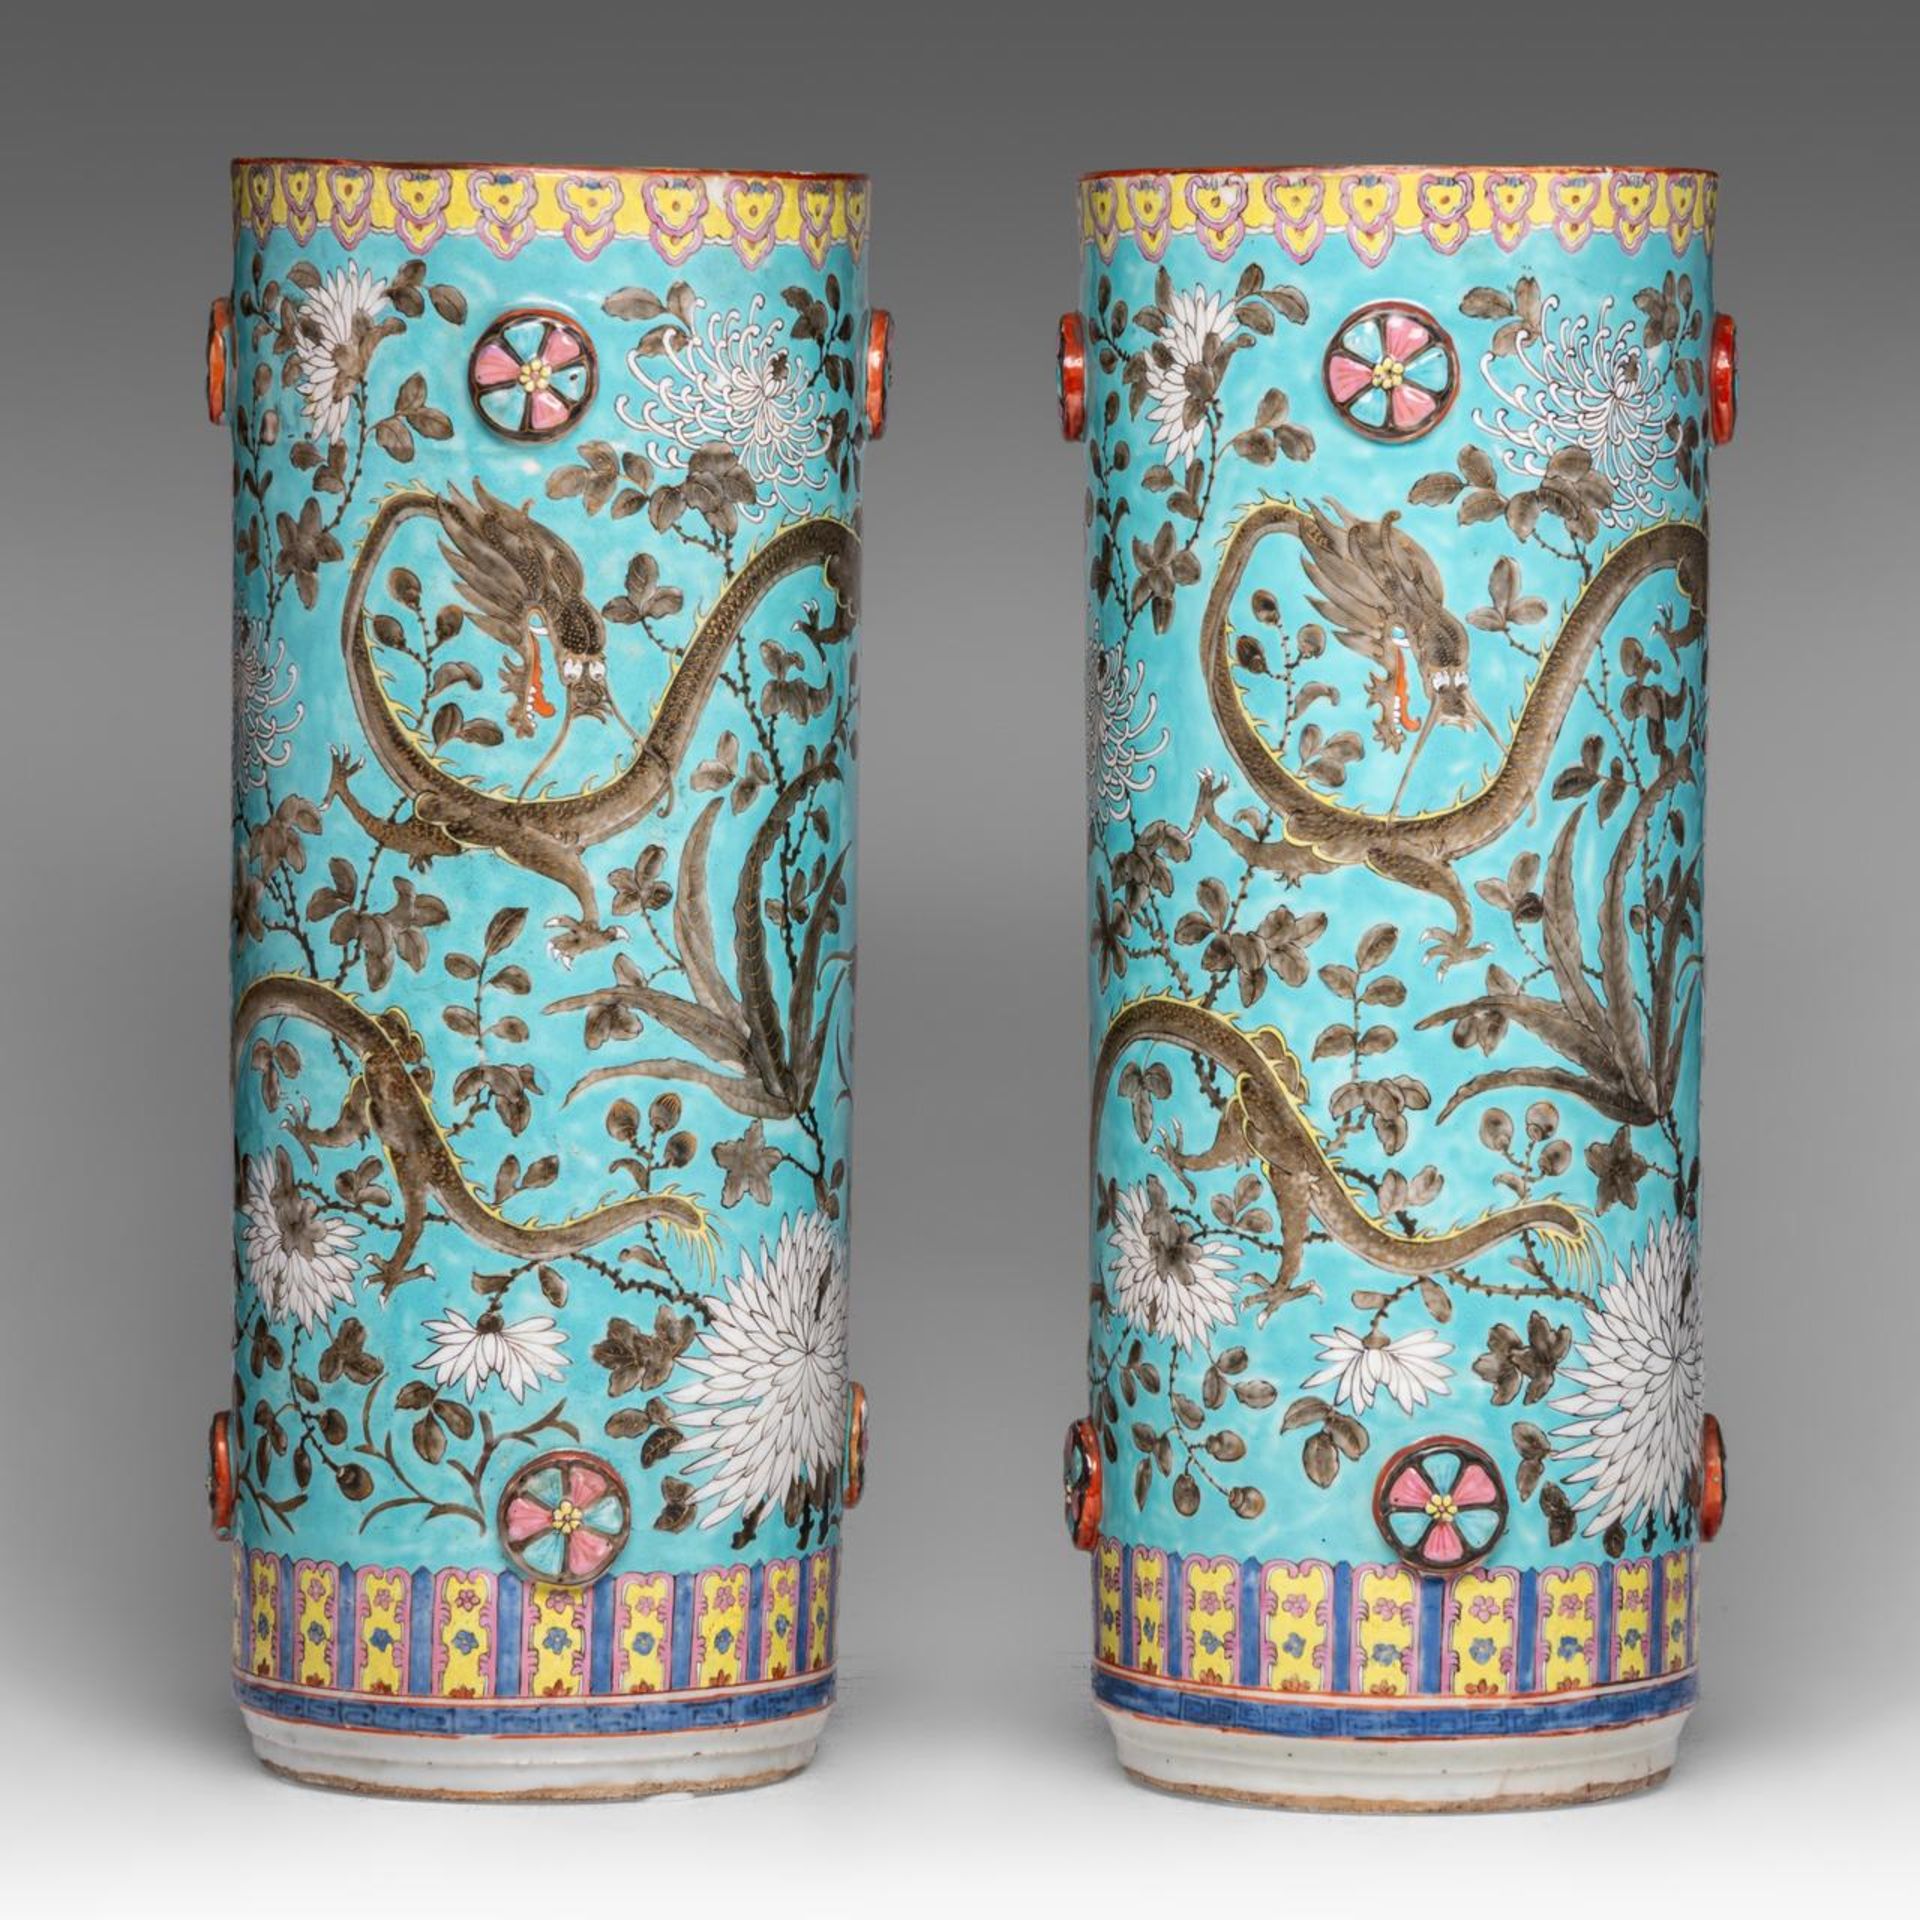 A pair of Chinese Dayazai style turquoise ground 'Dragons amongst Blossoms' umbrella stands, late 19